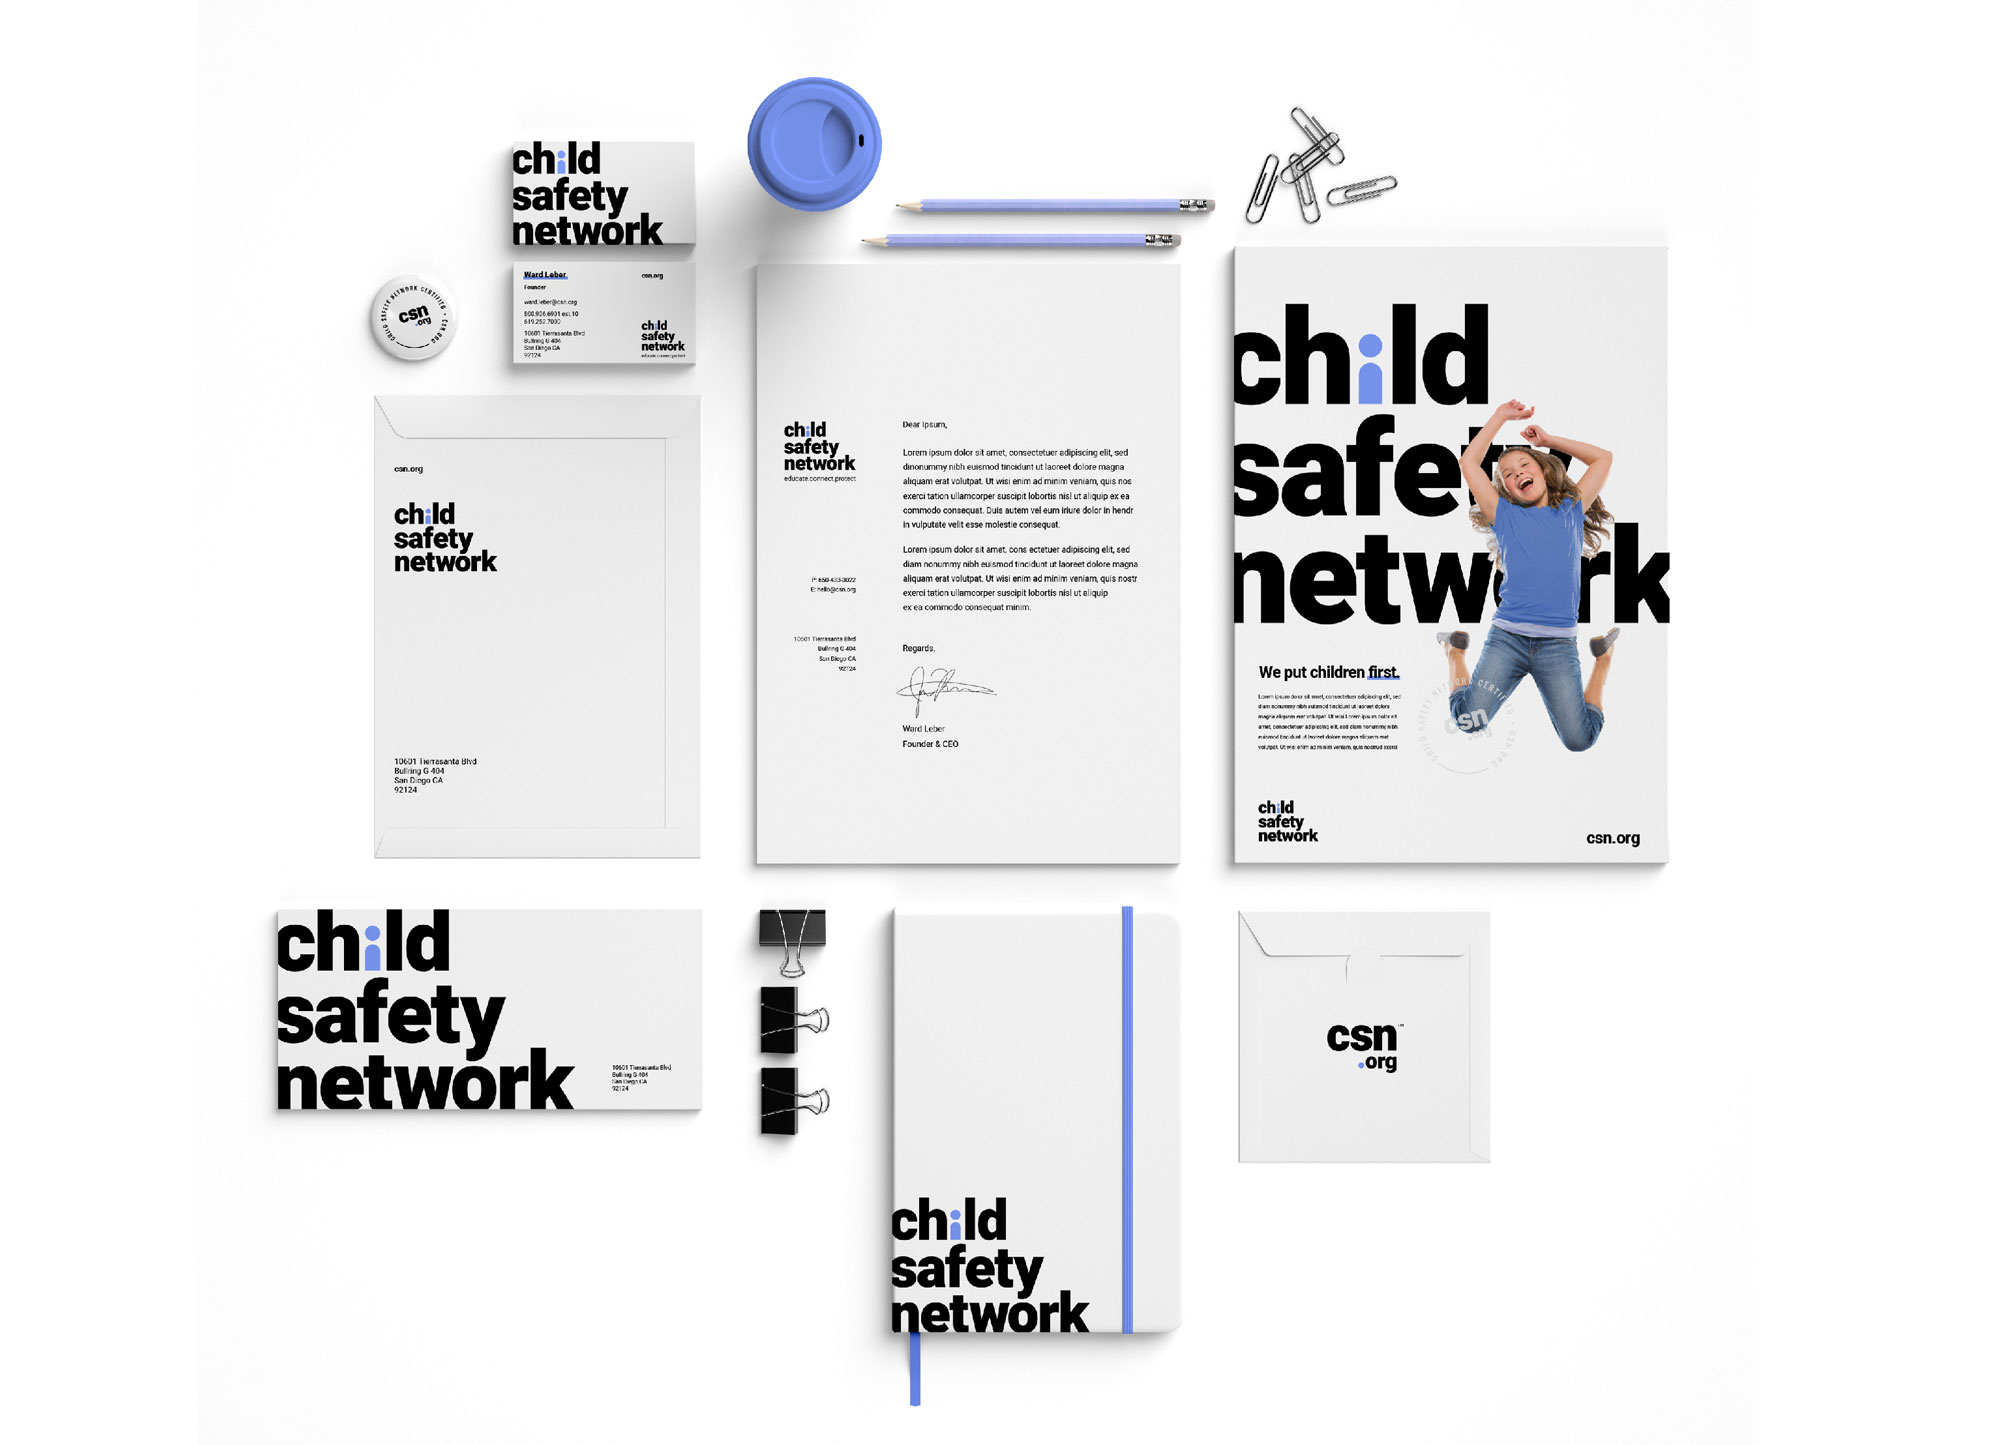 Ethnographic Research Product Image 1 - Child Safety Network